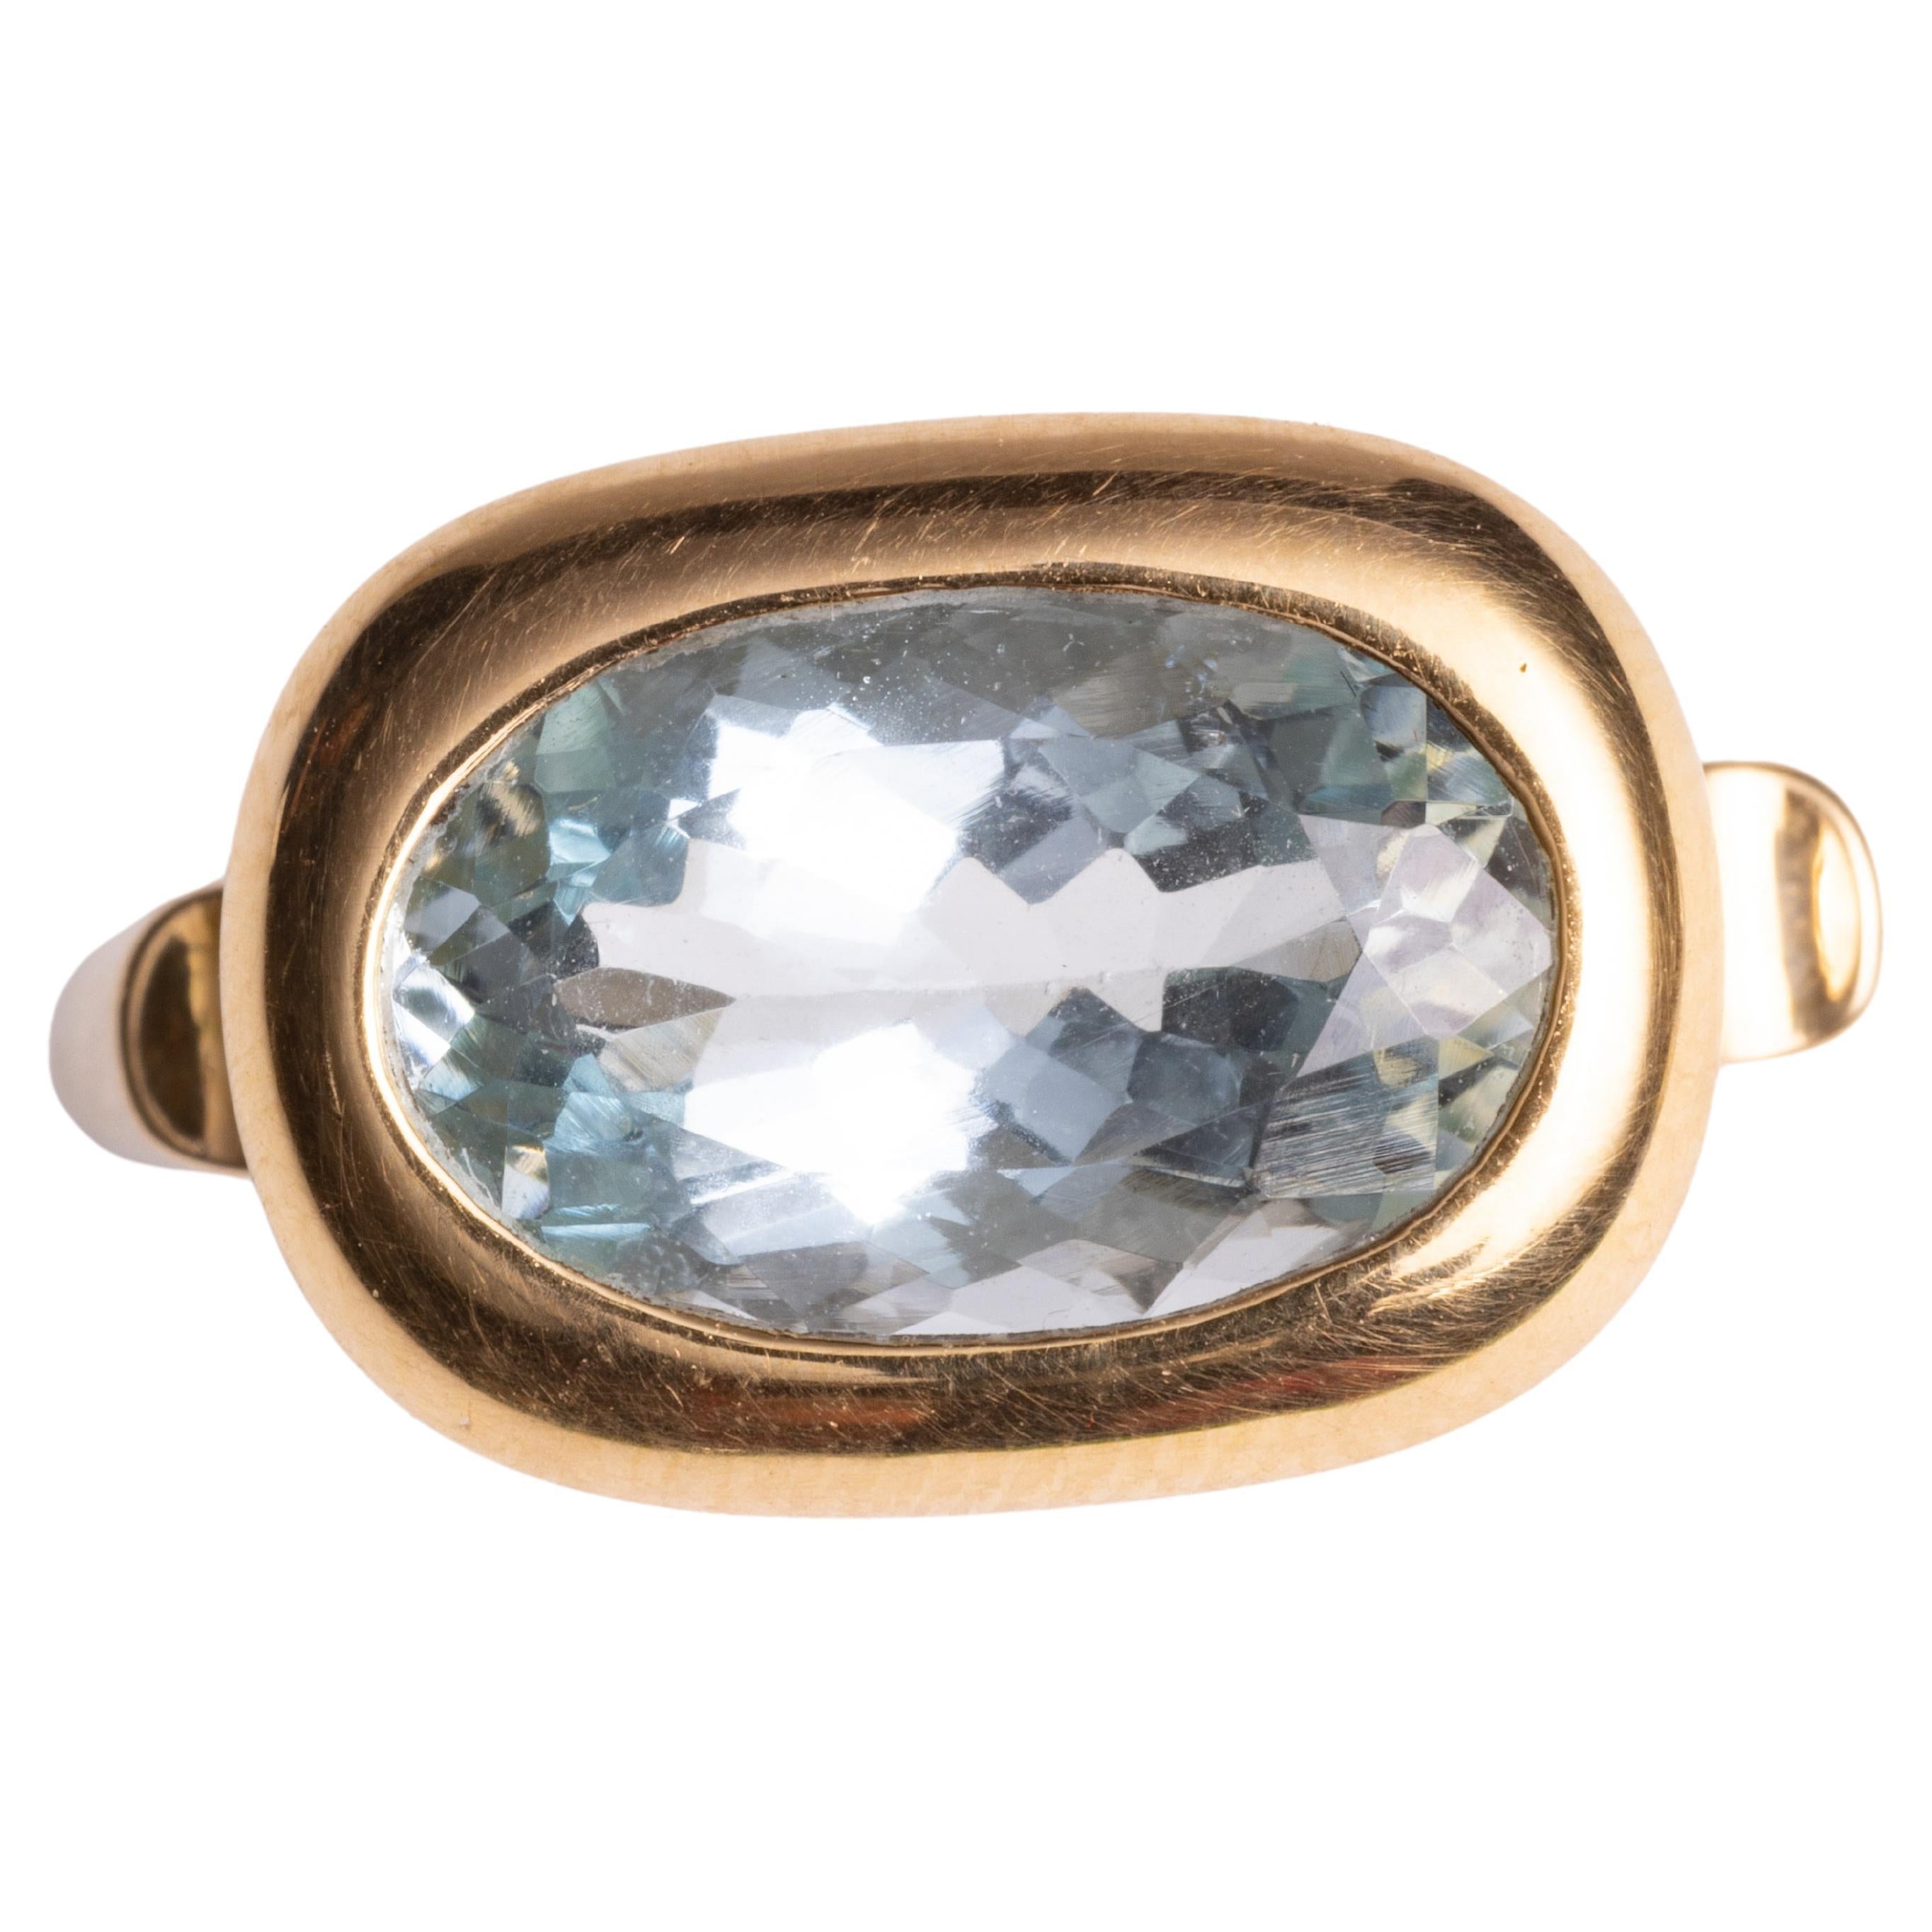 A beautiful, translucent blue, faceted oval aquamarine set in a combination of 18K gold and sterling silver.  This is a weighted gold, not plated.  Ring size is a 7.

The fine jewelry collection is sourced, designed or created by Deborah Lockhart